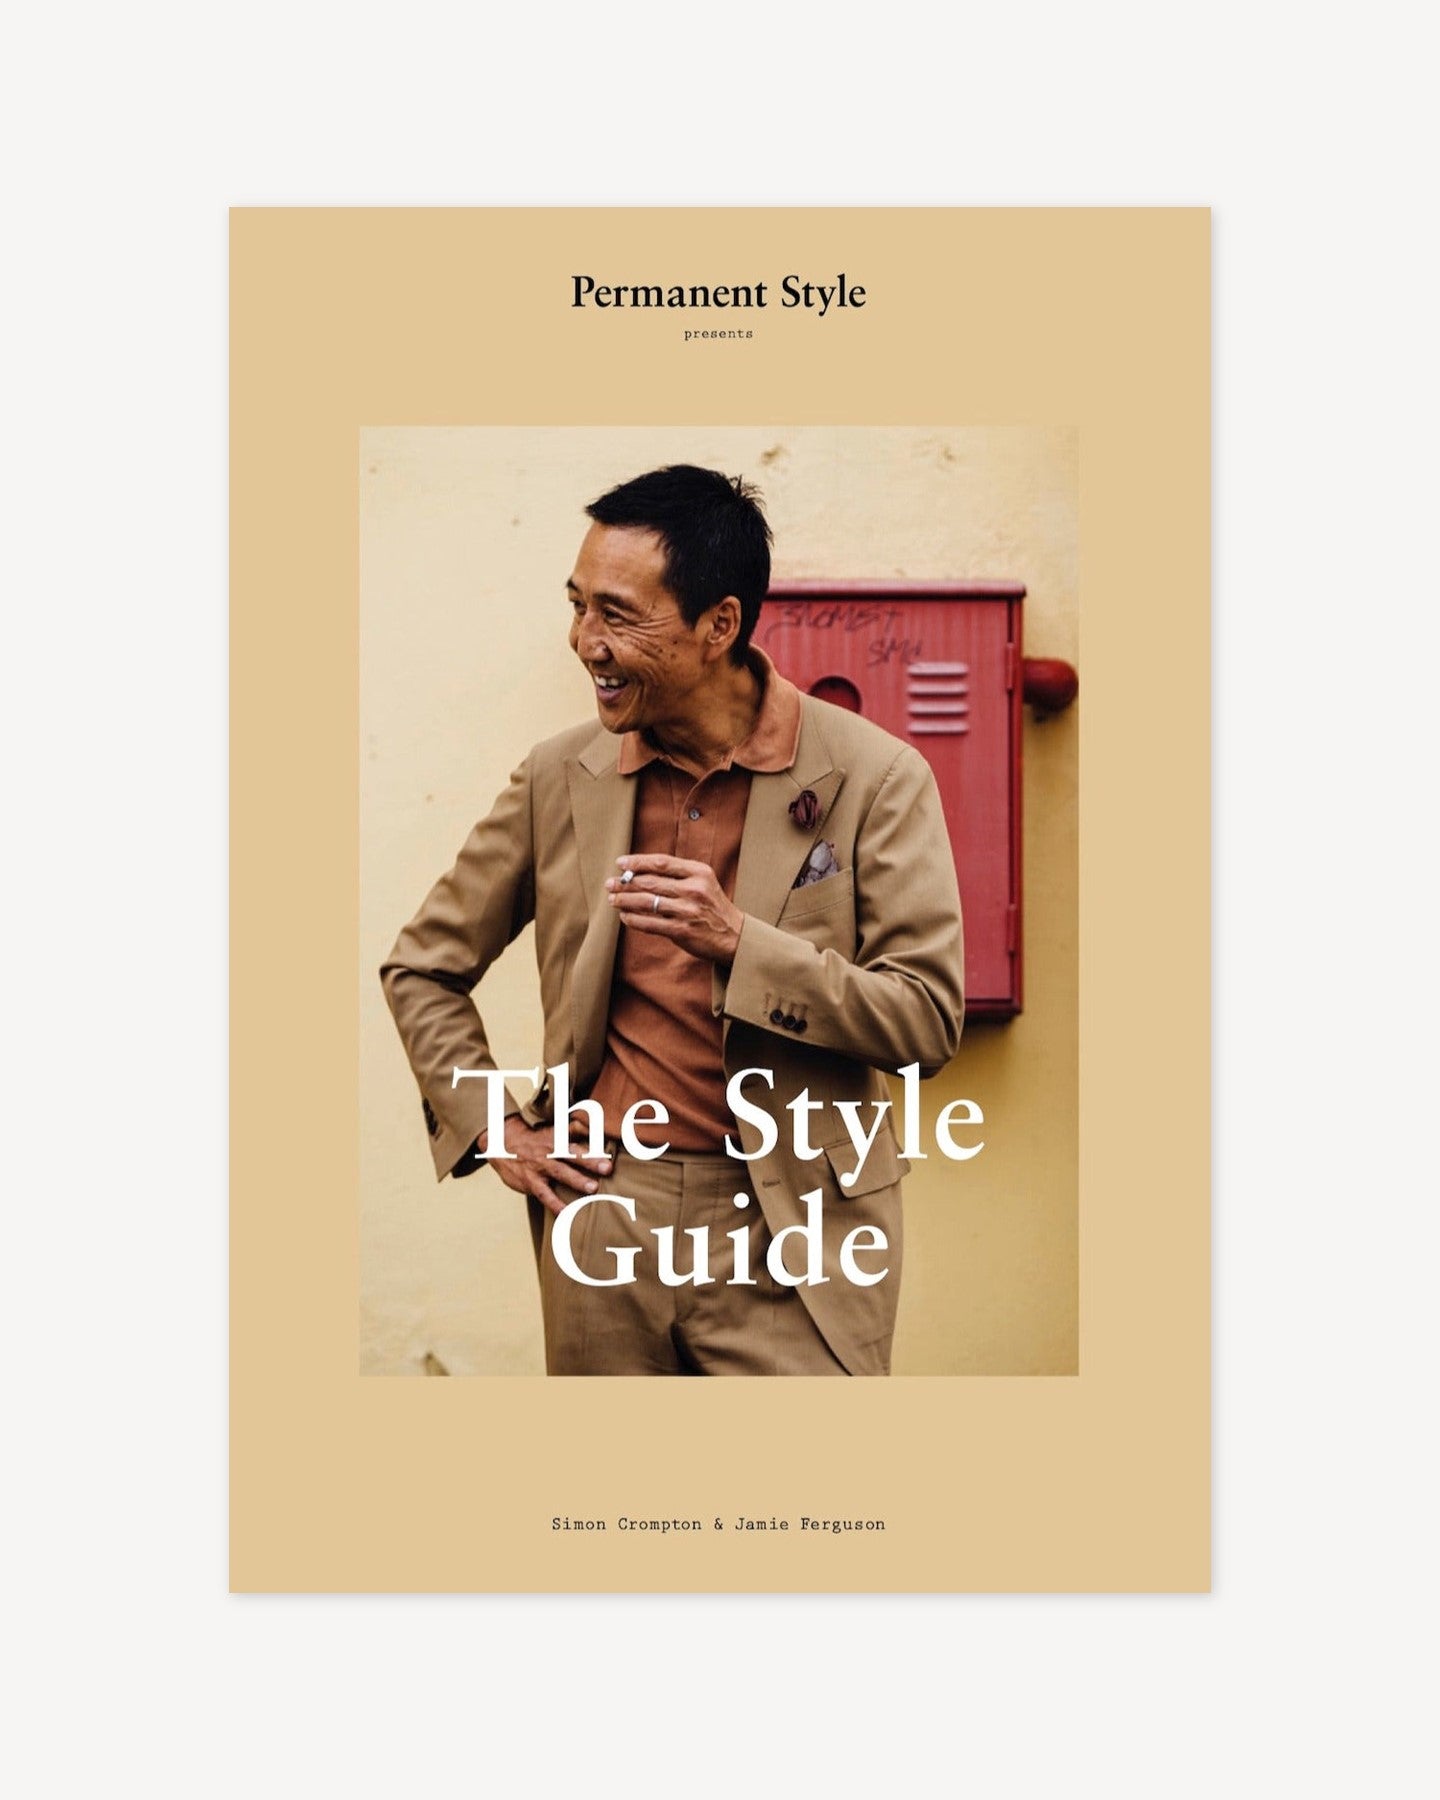 The Style Guide by Permanent Style